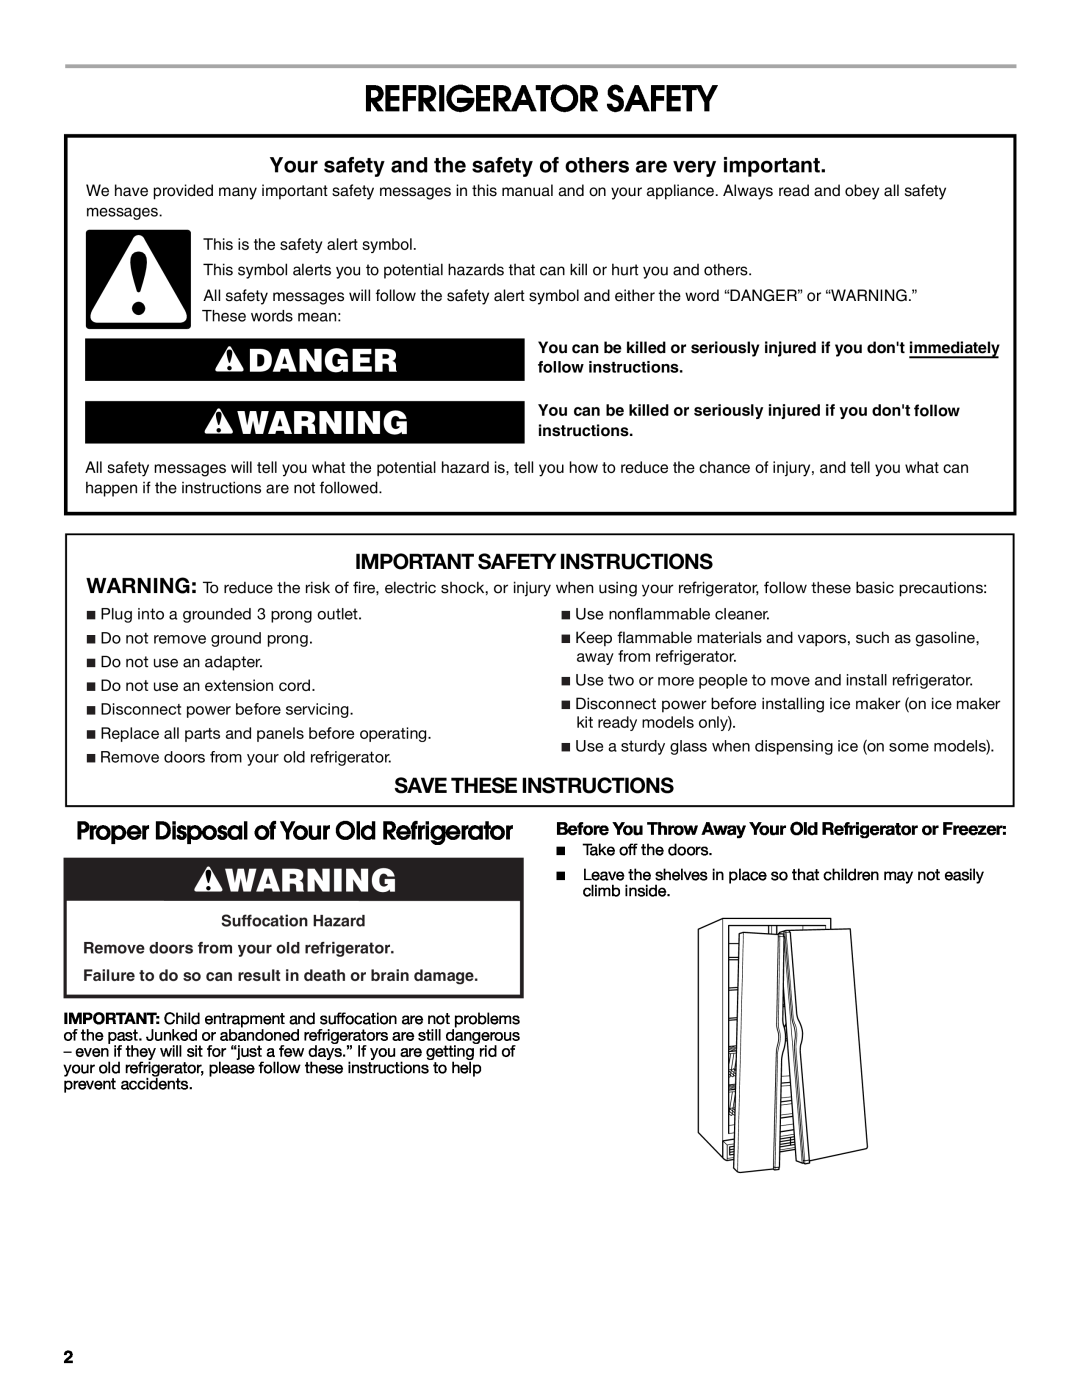 Whirlpool RS22AQXMQ01 Refrigerator Safety, Danger, Proper Disposal of Your Old Refrigerator, Important Safety Instructions 